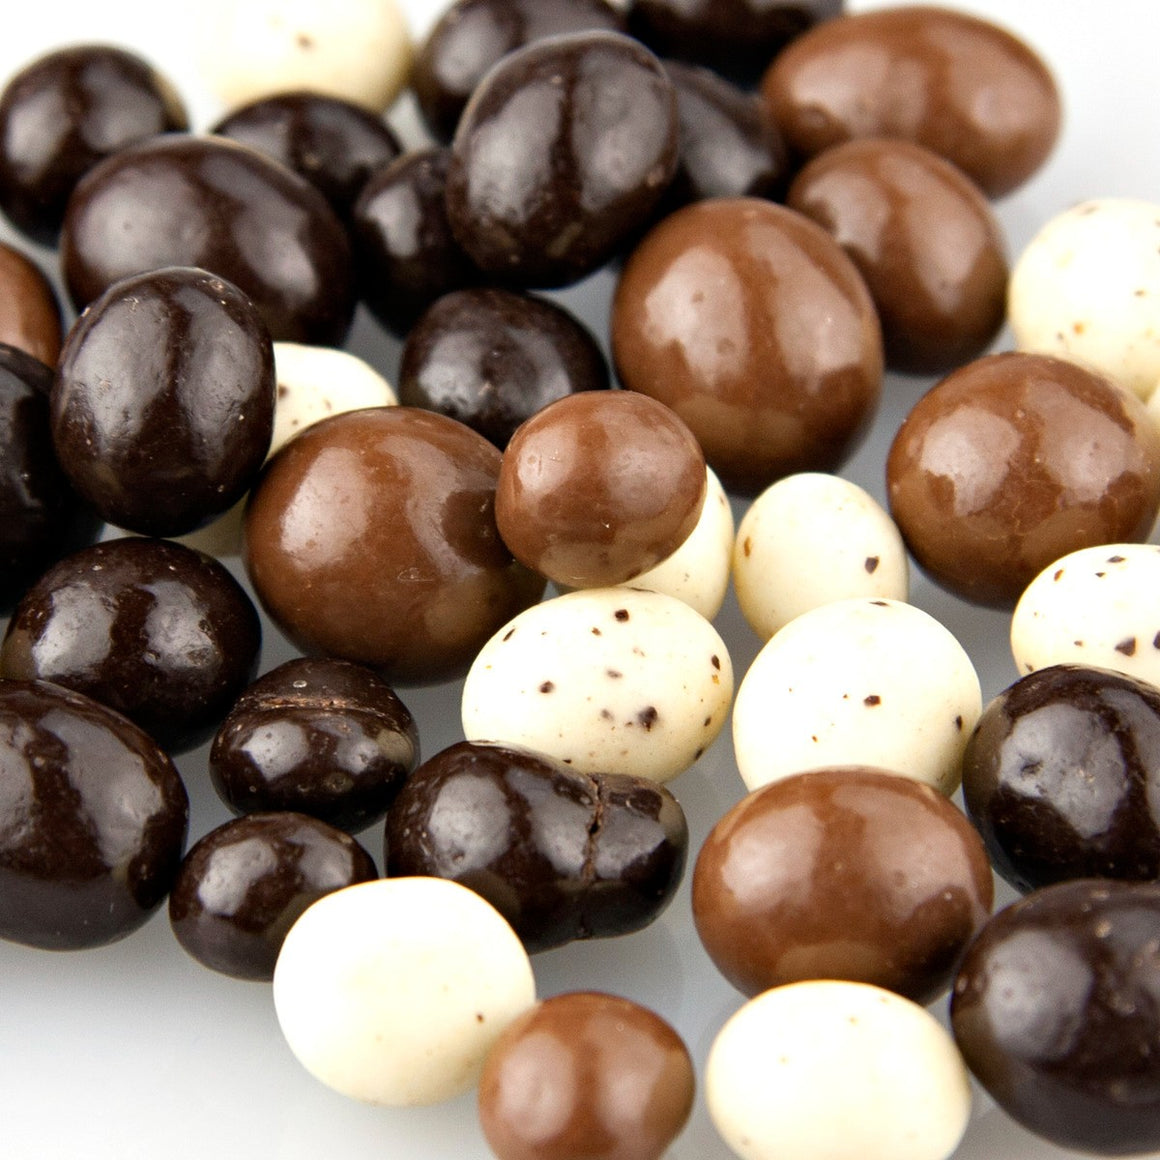 All City Candy Tri-Color Chocolate Covered Coffee Beans - Bulk Bags Bulk Unwrapped Bulk Foods Inc. For fresh candy and great service, visit www.allcitycandy.com